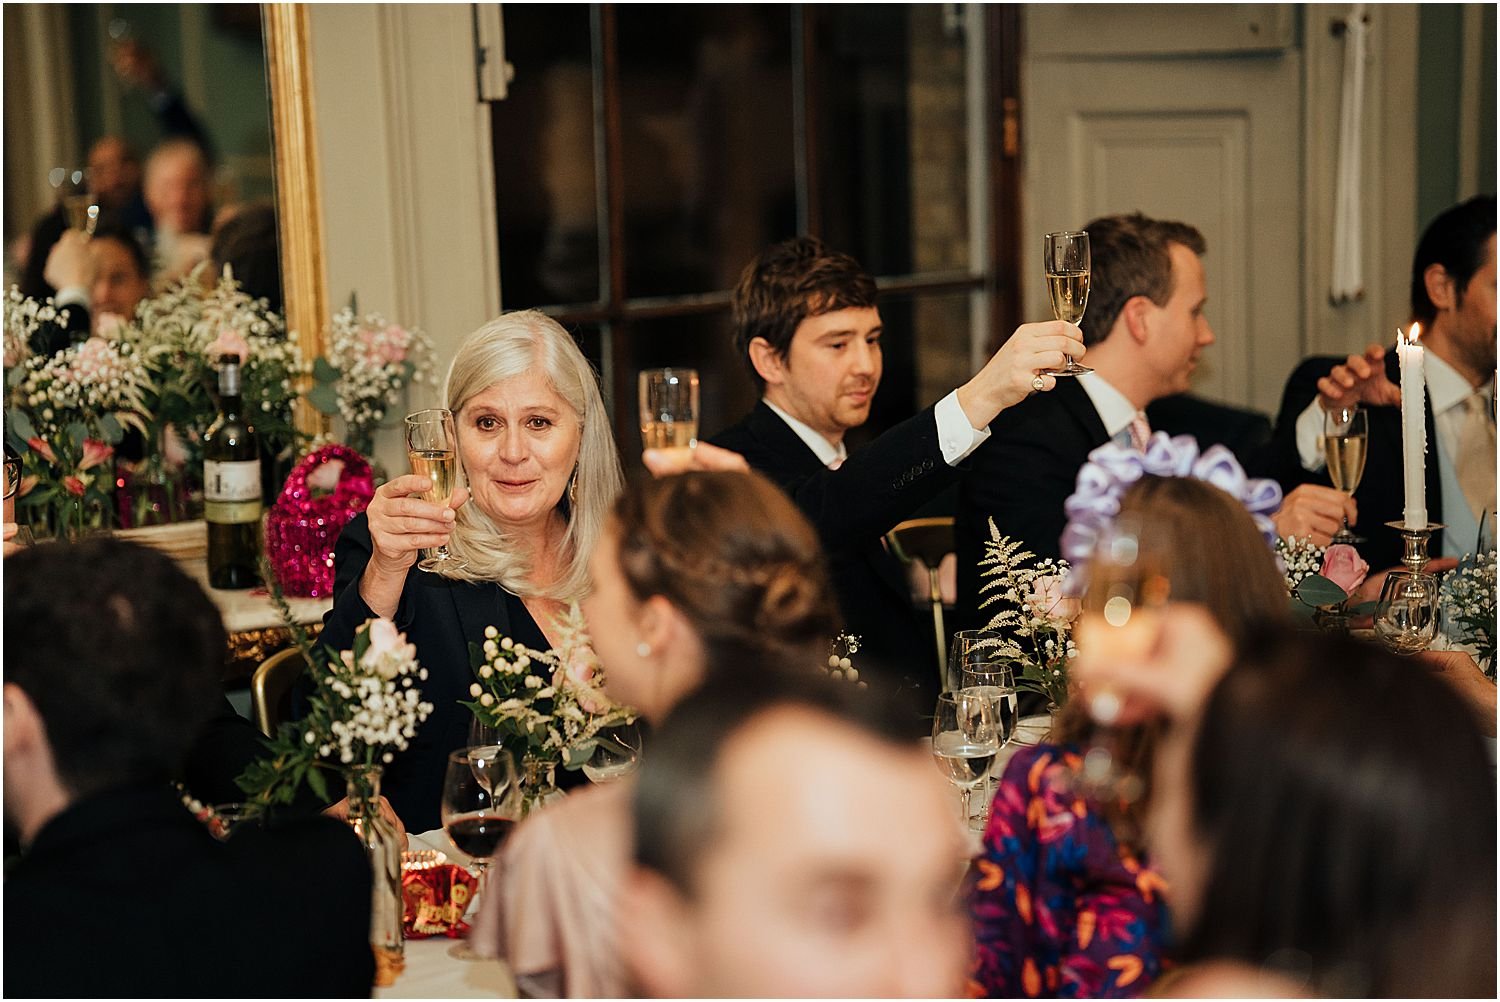 Wedding guests toasting during speeches